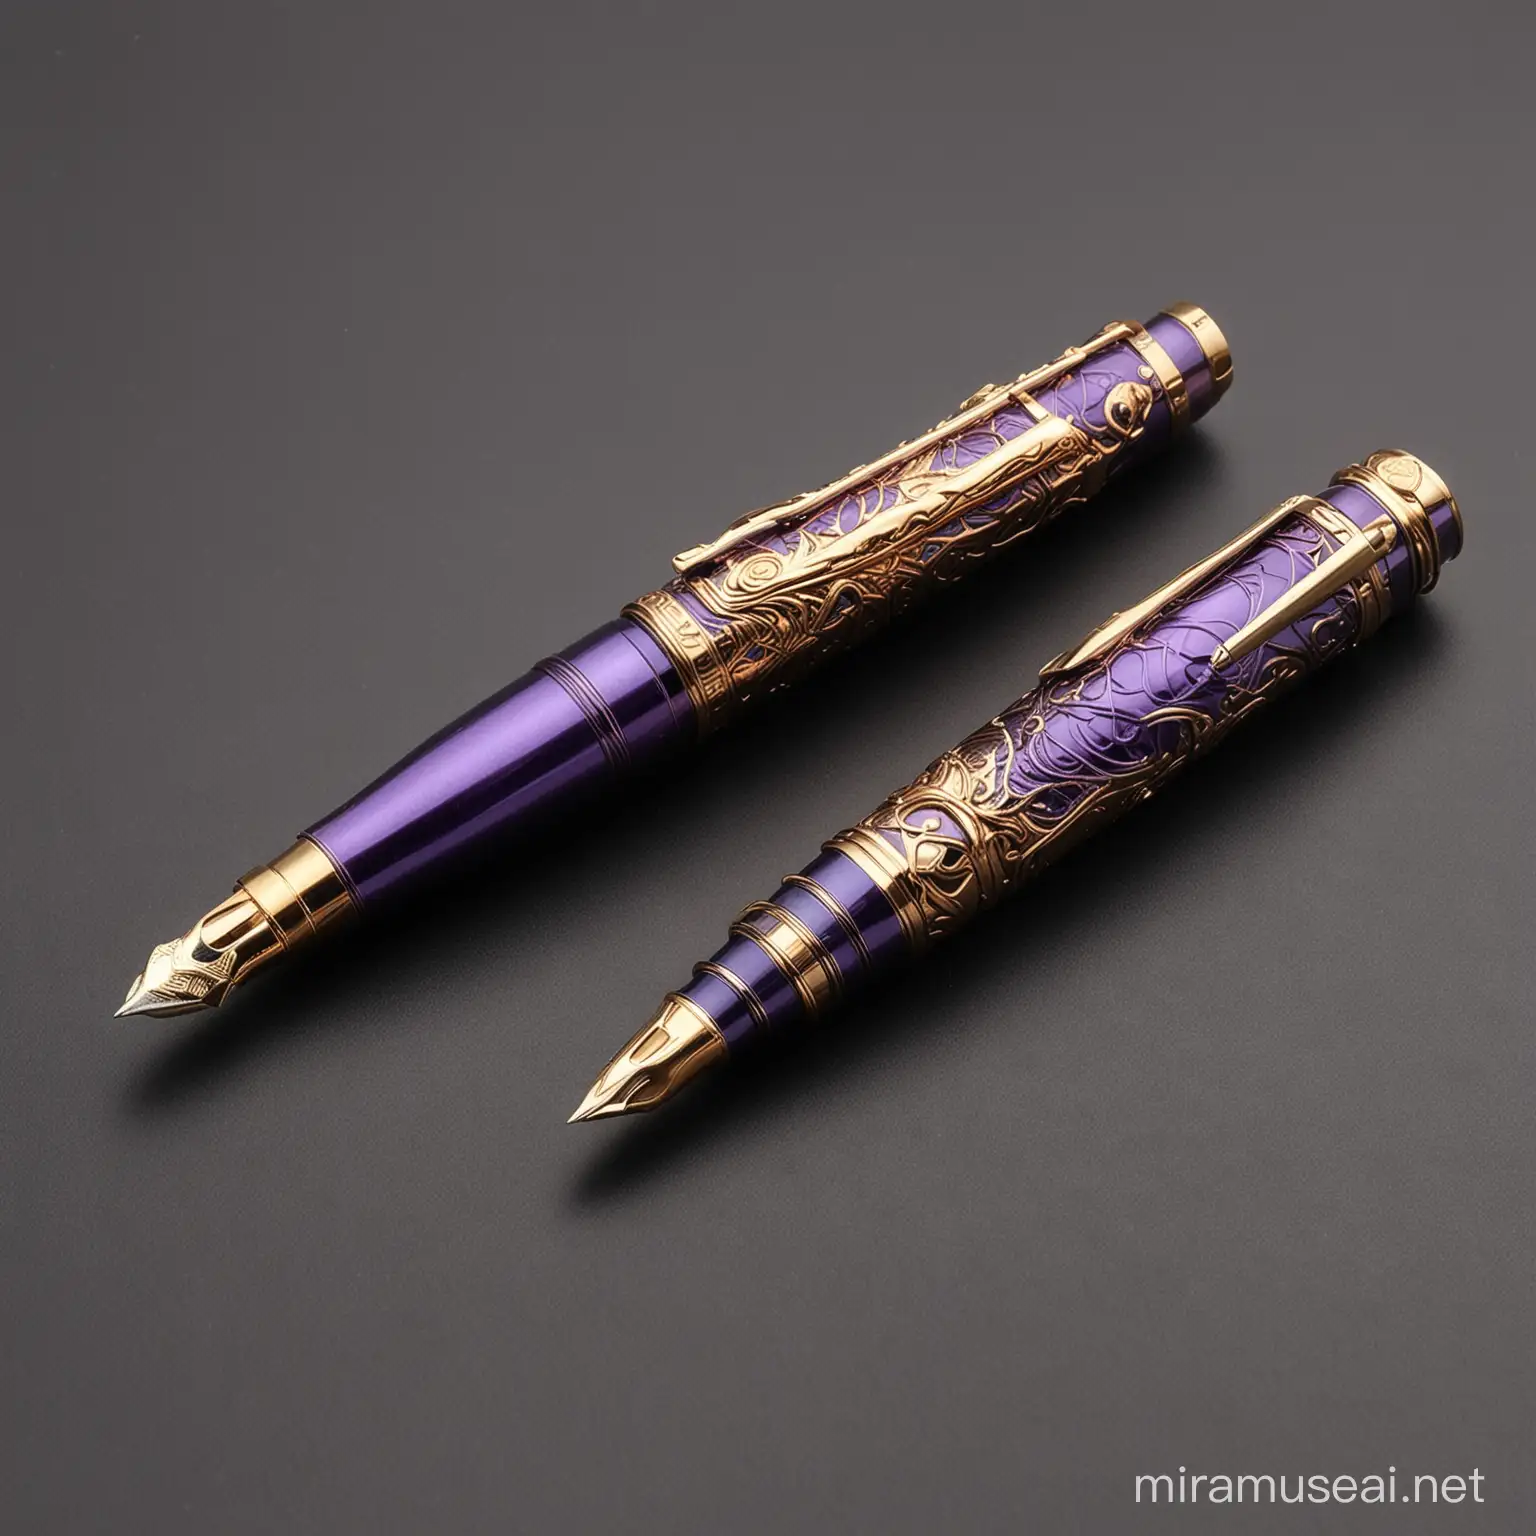 Elegant Fountain Pen Inspired by Thanos Style